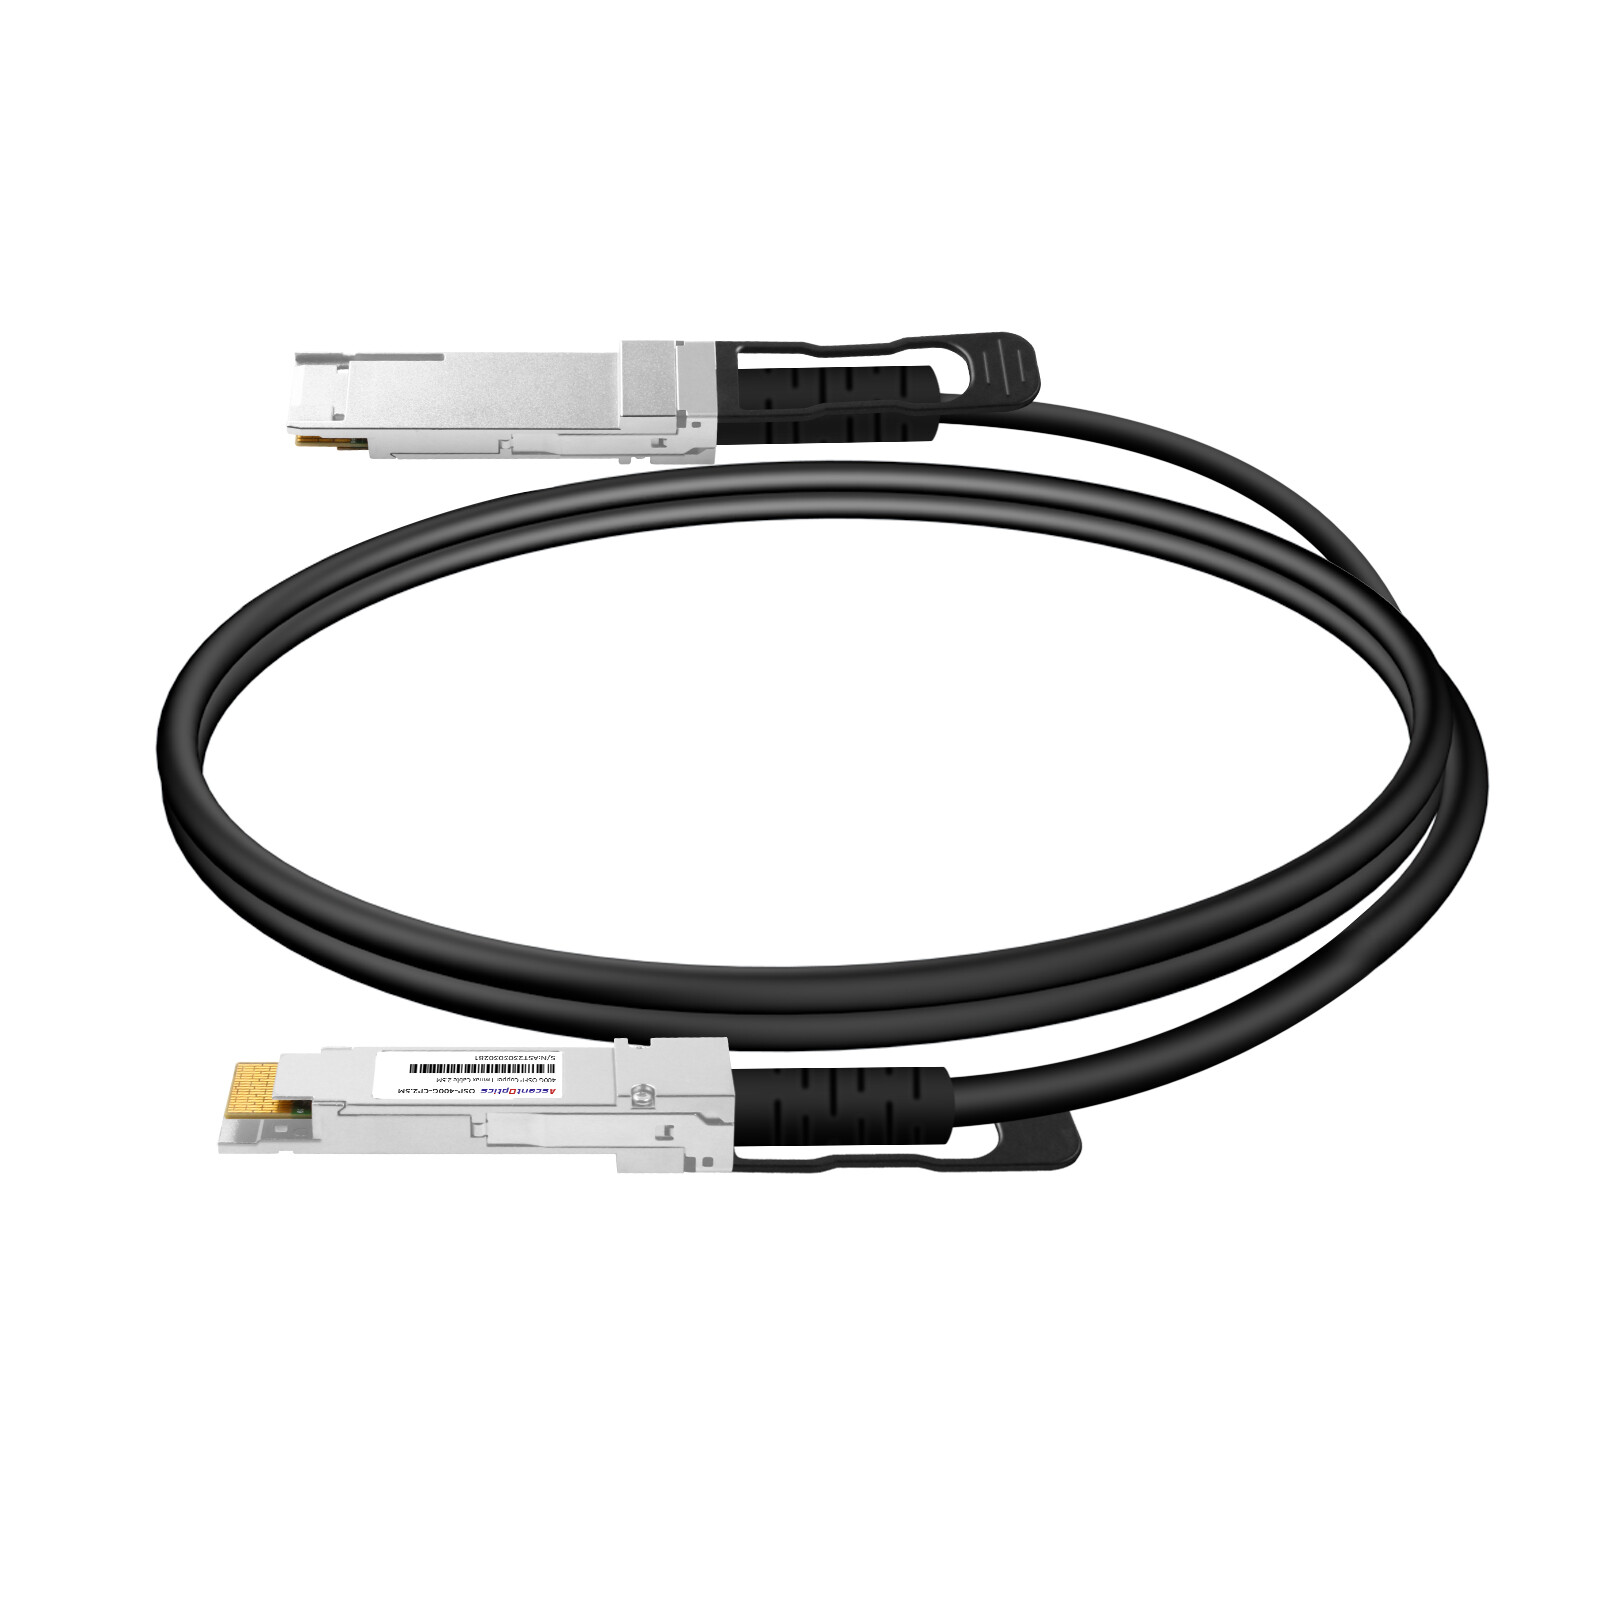 400G OSFP Copper DAC Cable,2.5 Meters,Passive